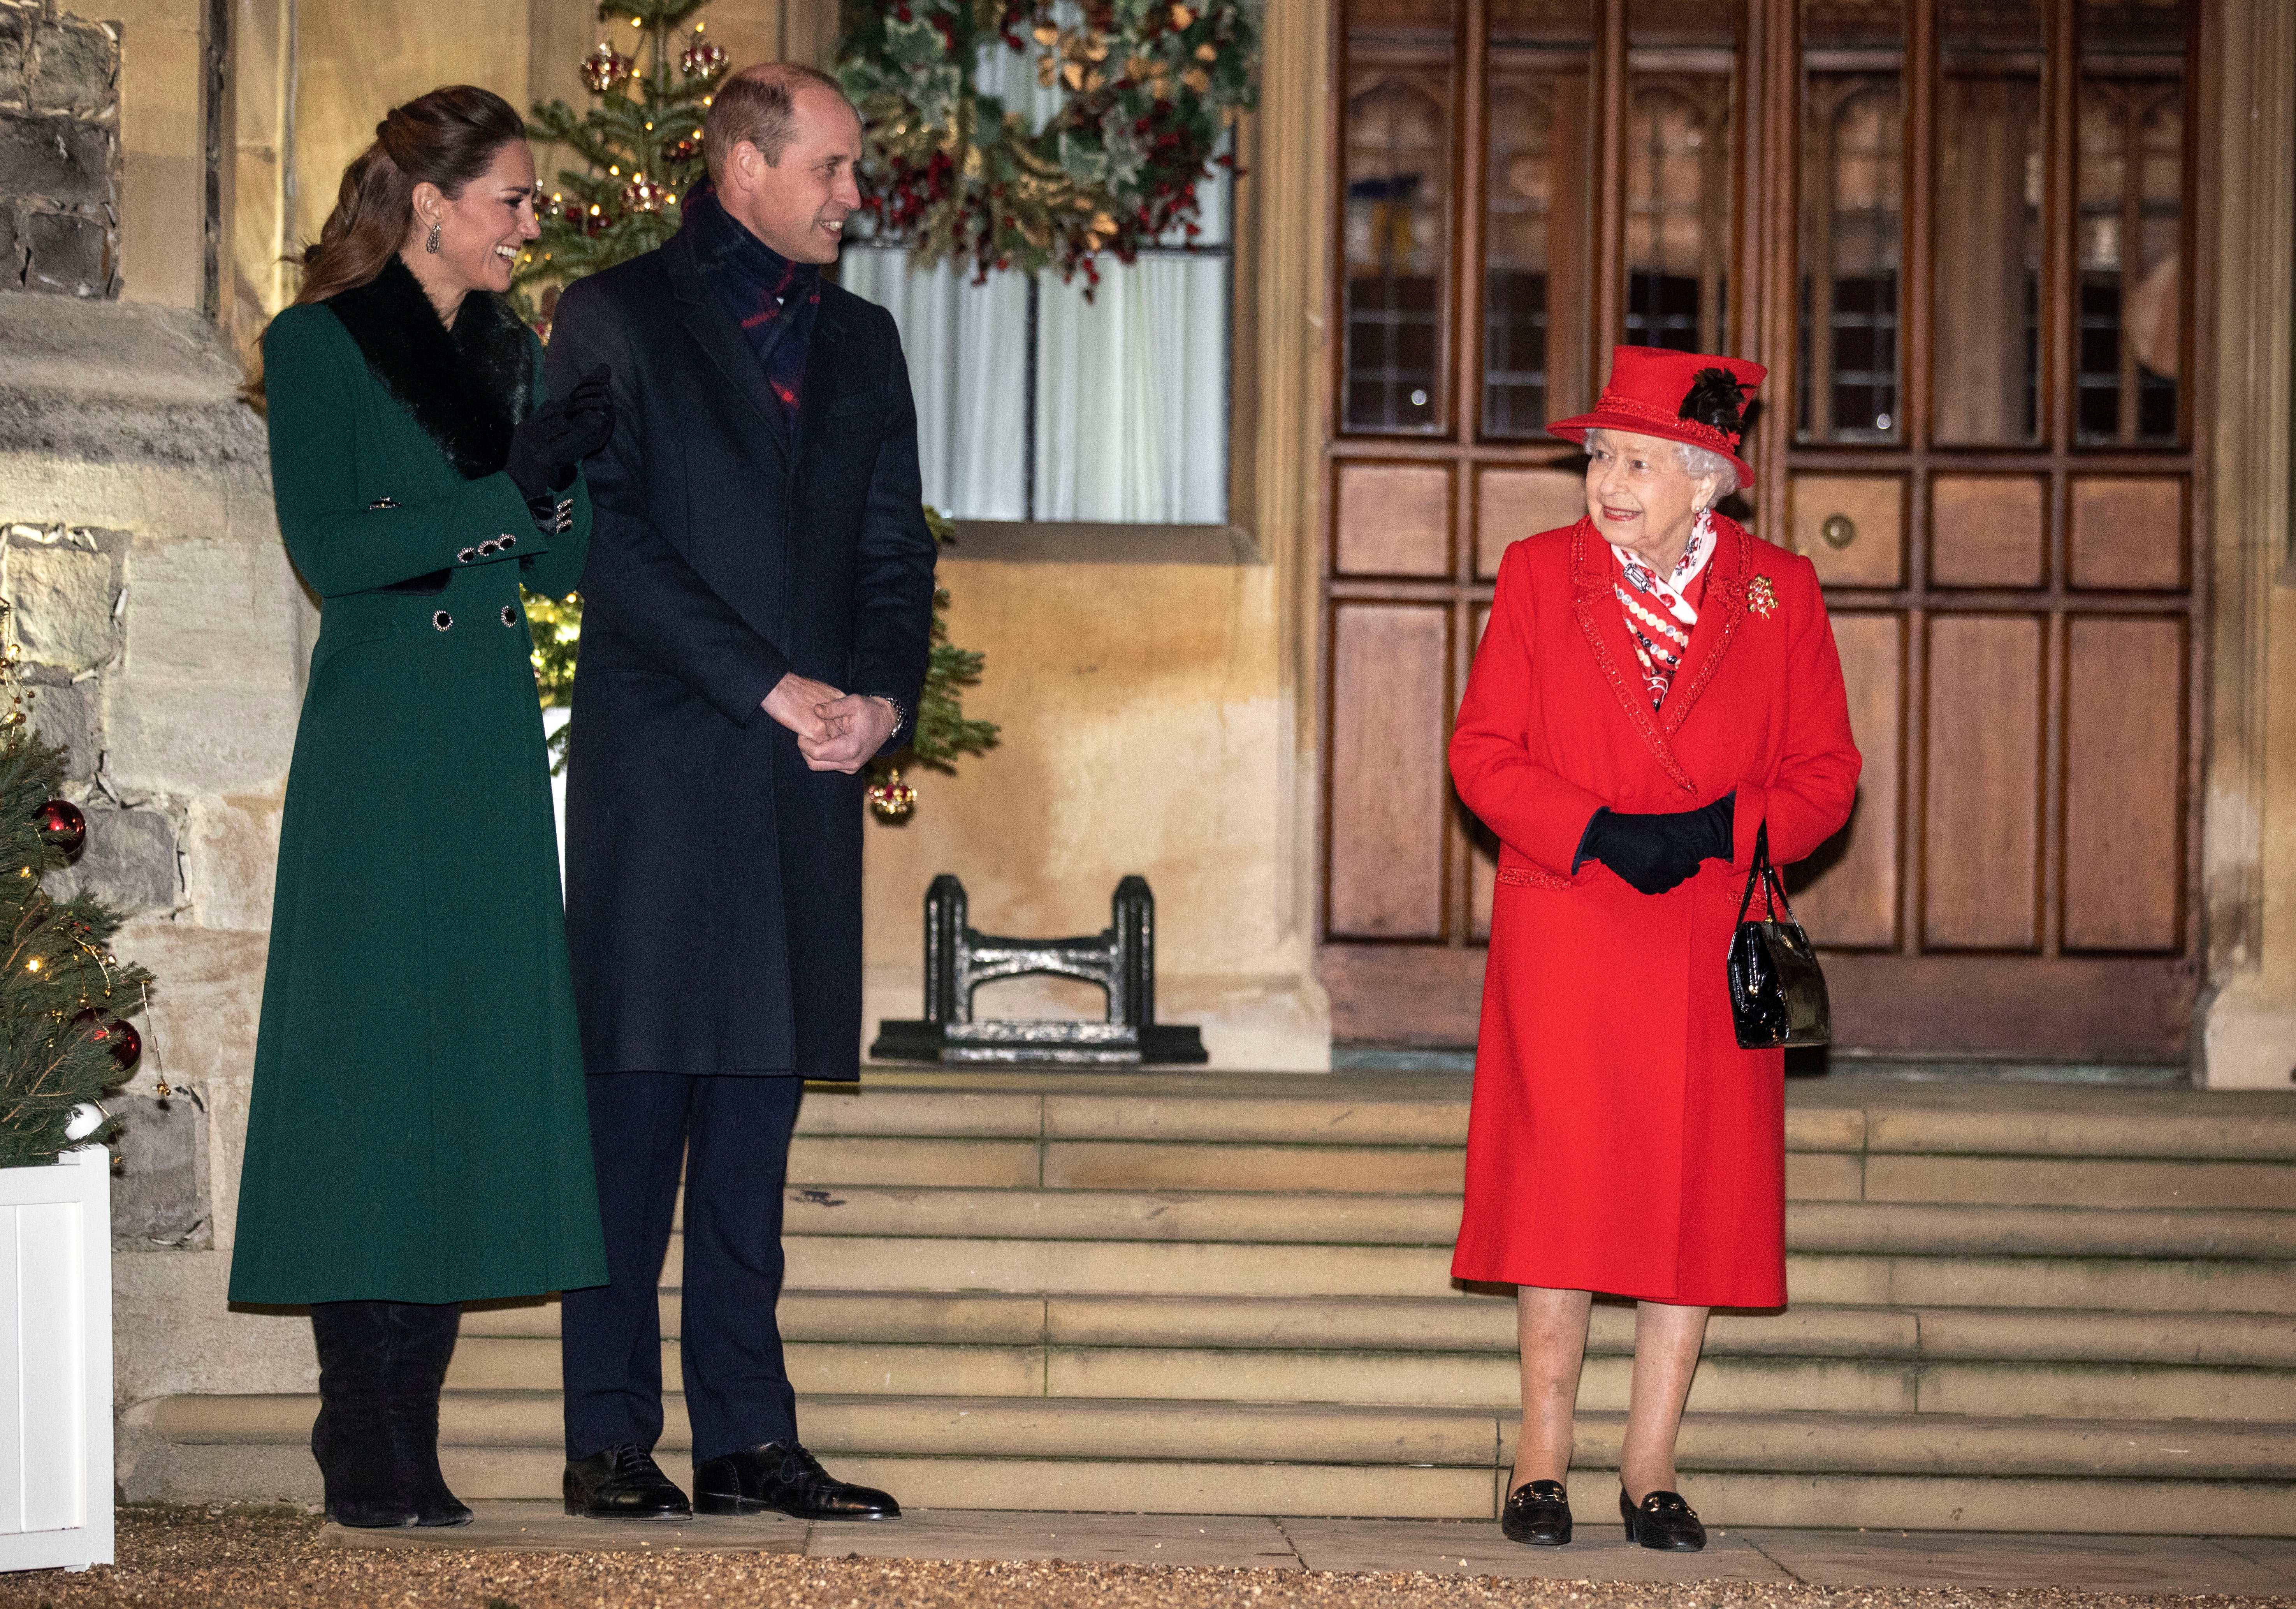 The Queen and the Duke and Duchess of Cambridge thank volunteers and key workers for their efforts during the pandemic